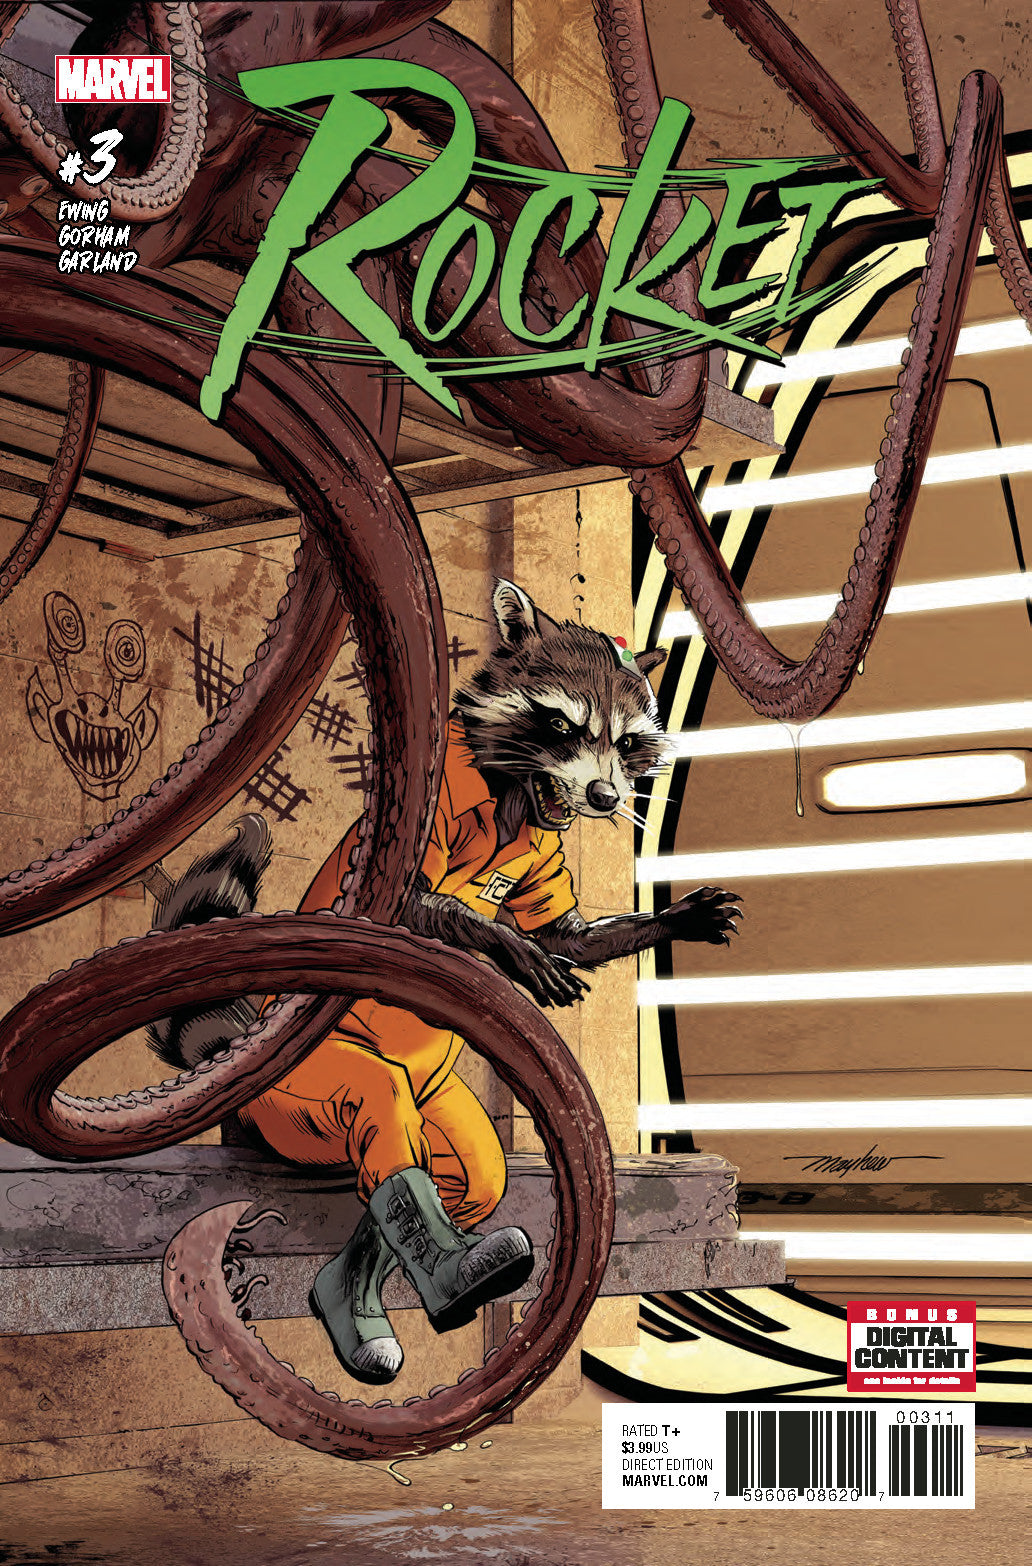 ROCKET #3 COVER